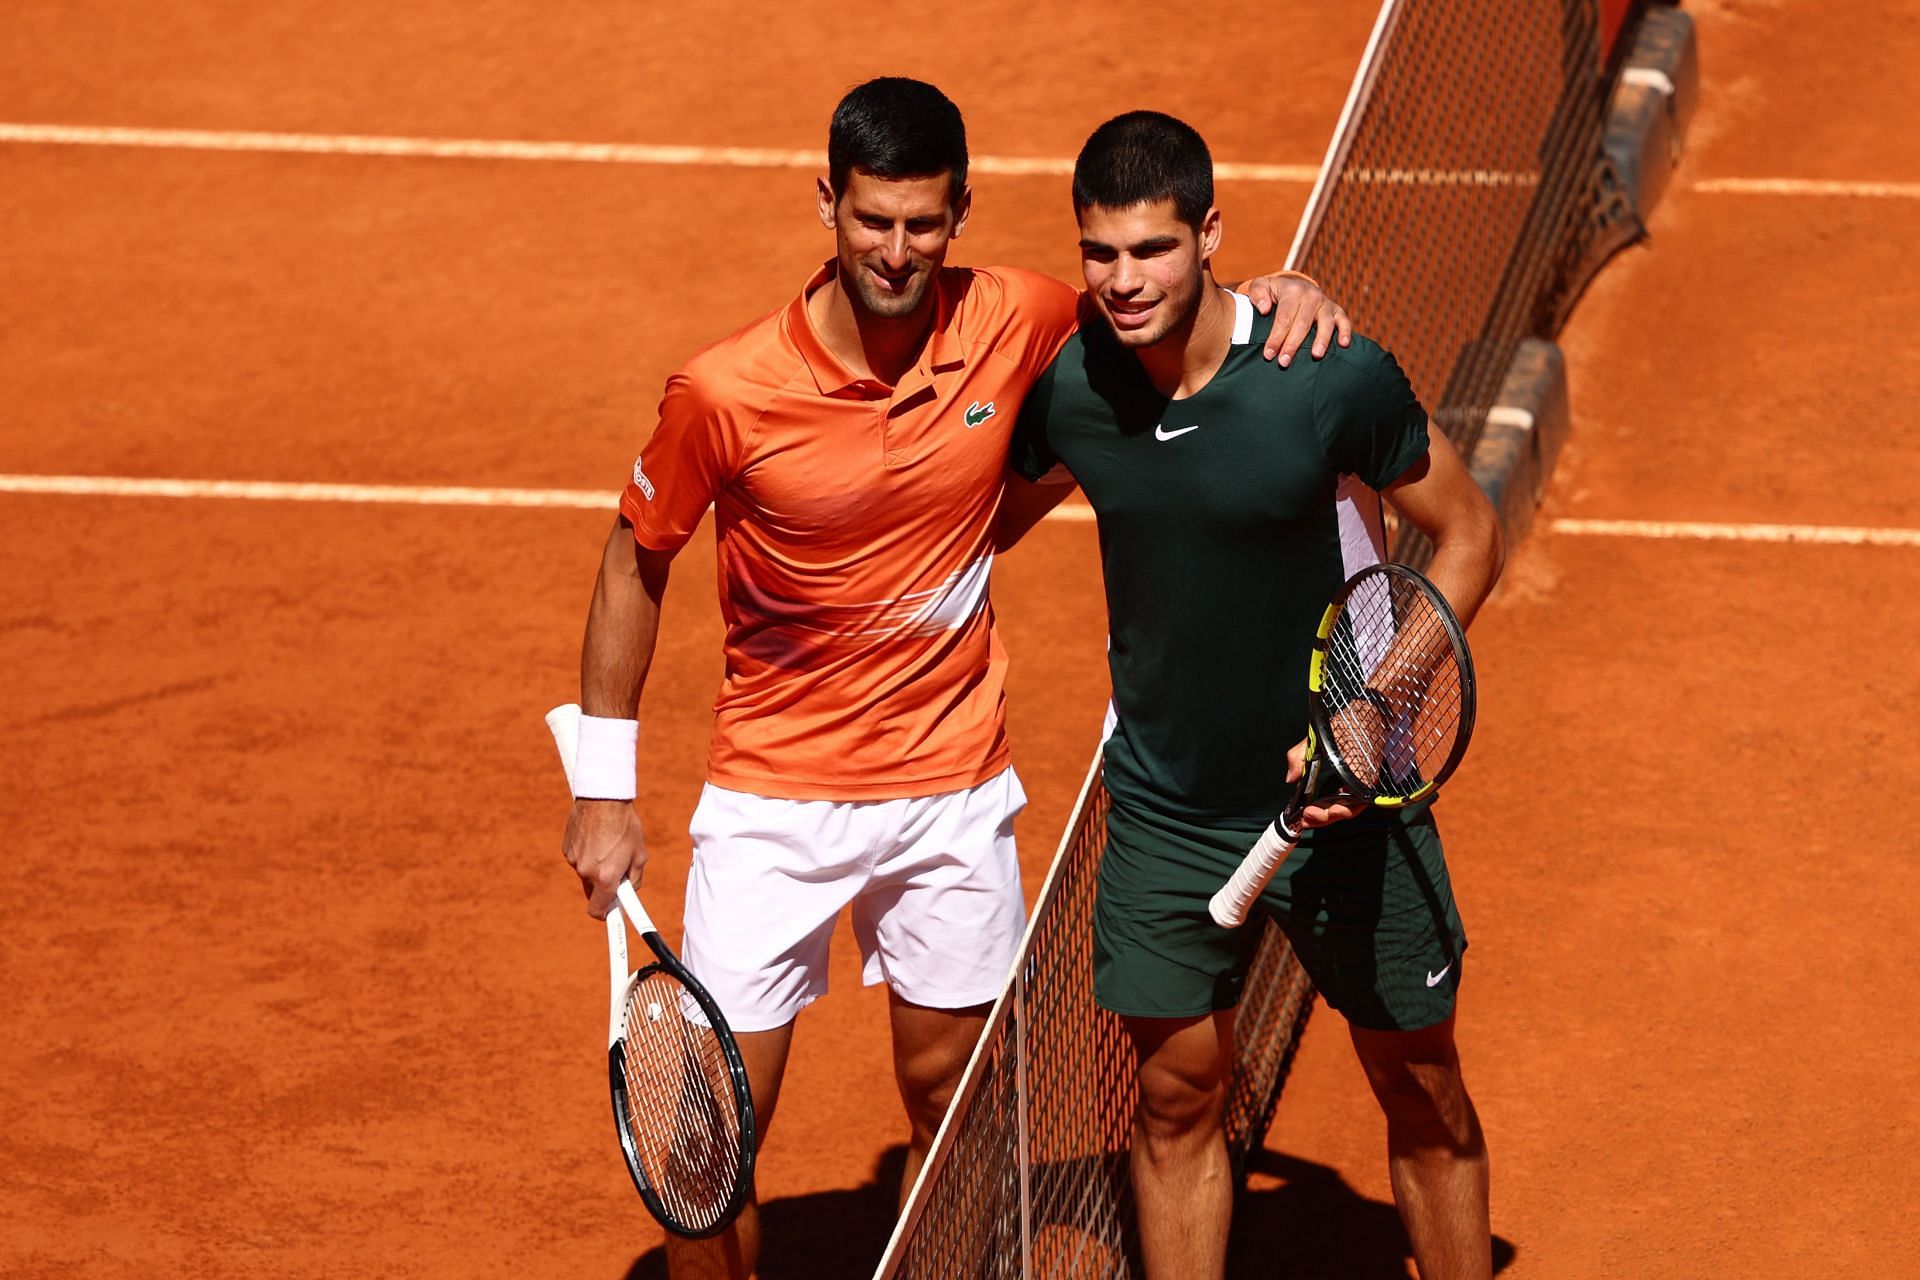 Djokovic and Carlos might face off in the 2023 Wimbledon Championships